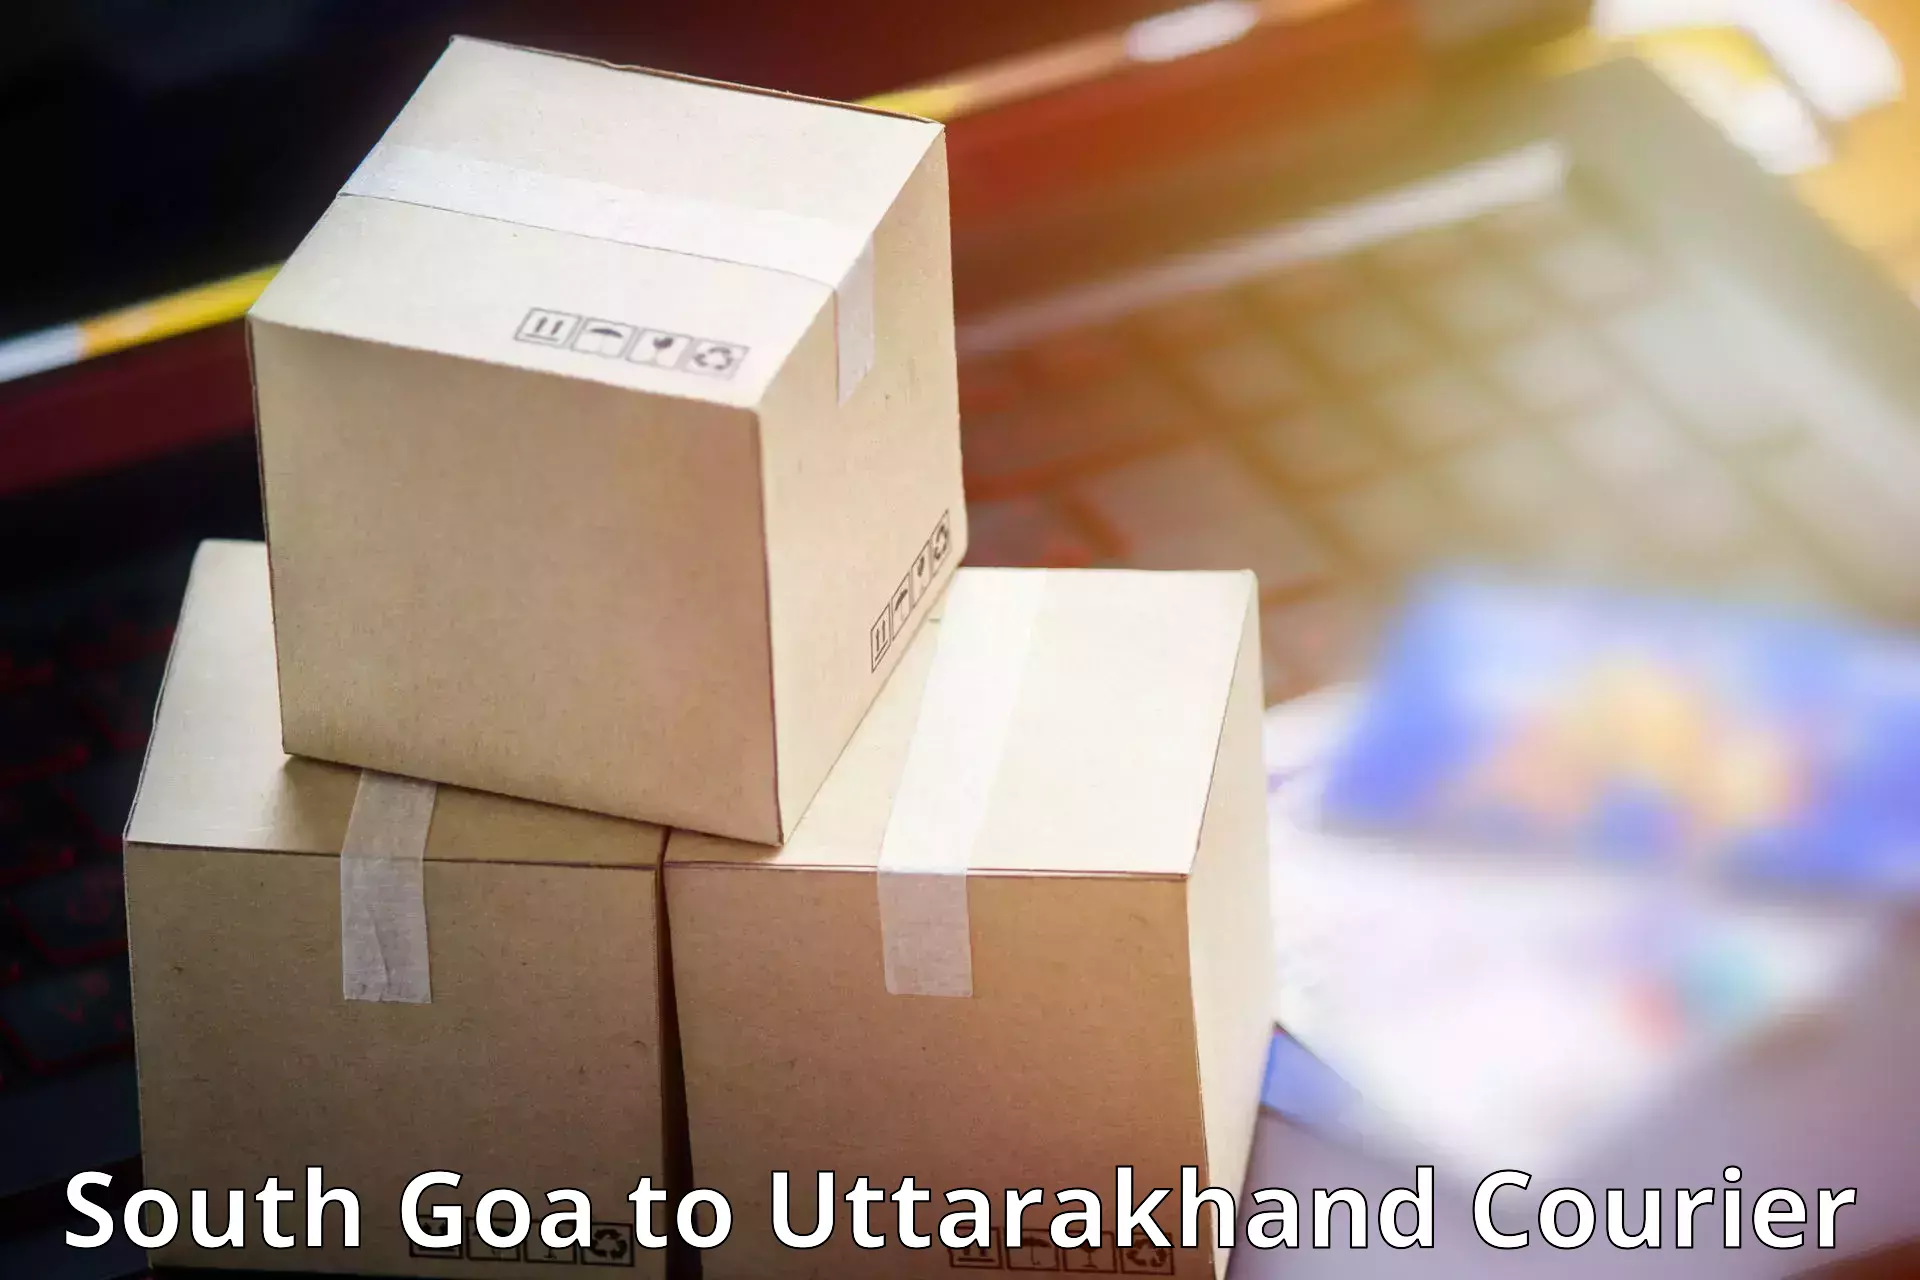 Regular parcel service in South Goa to Pithoragarh